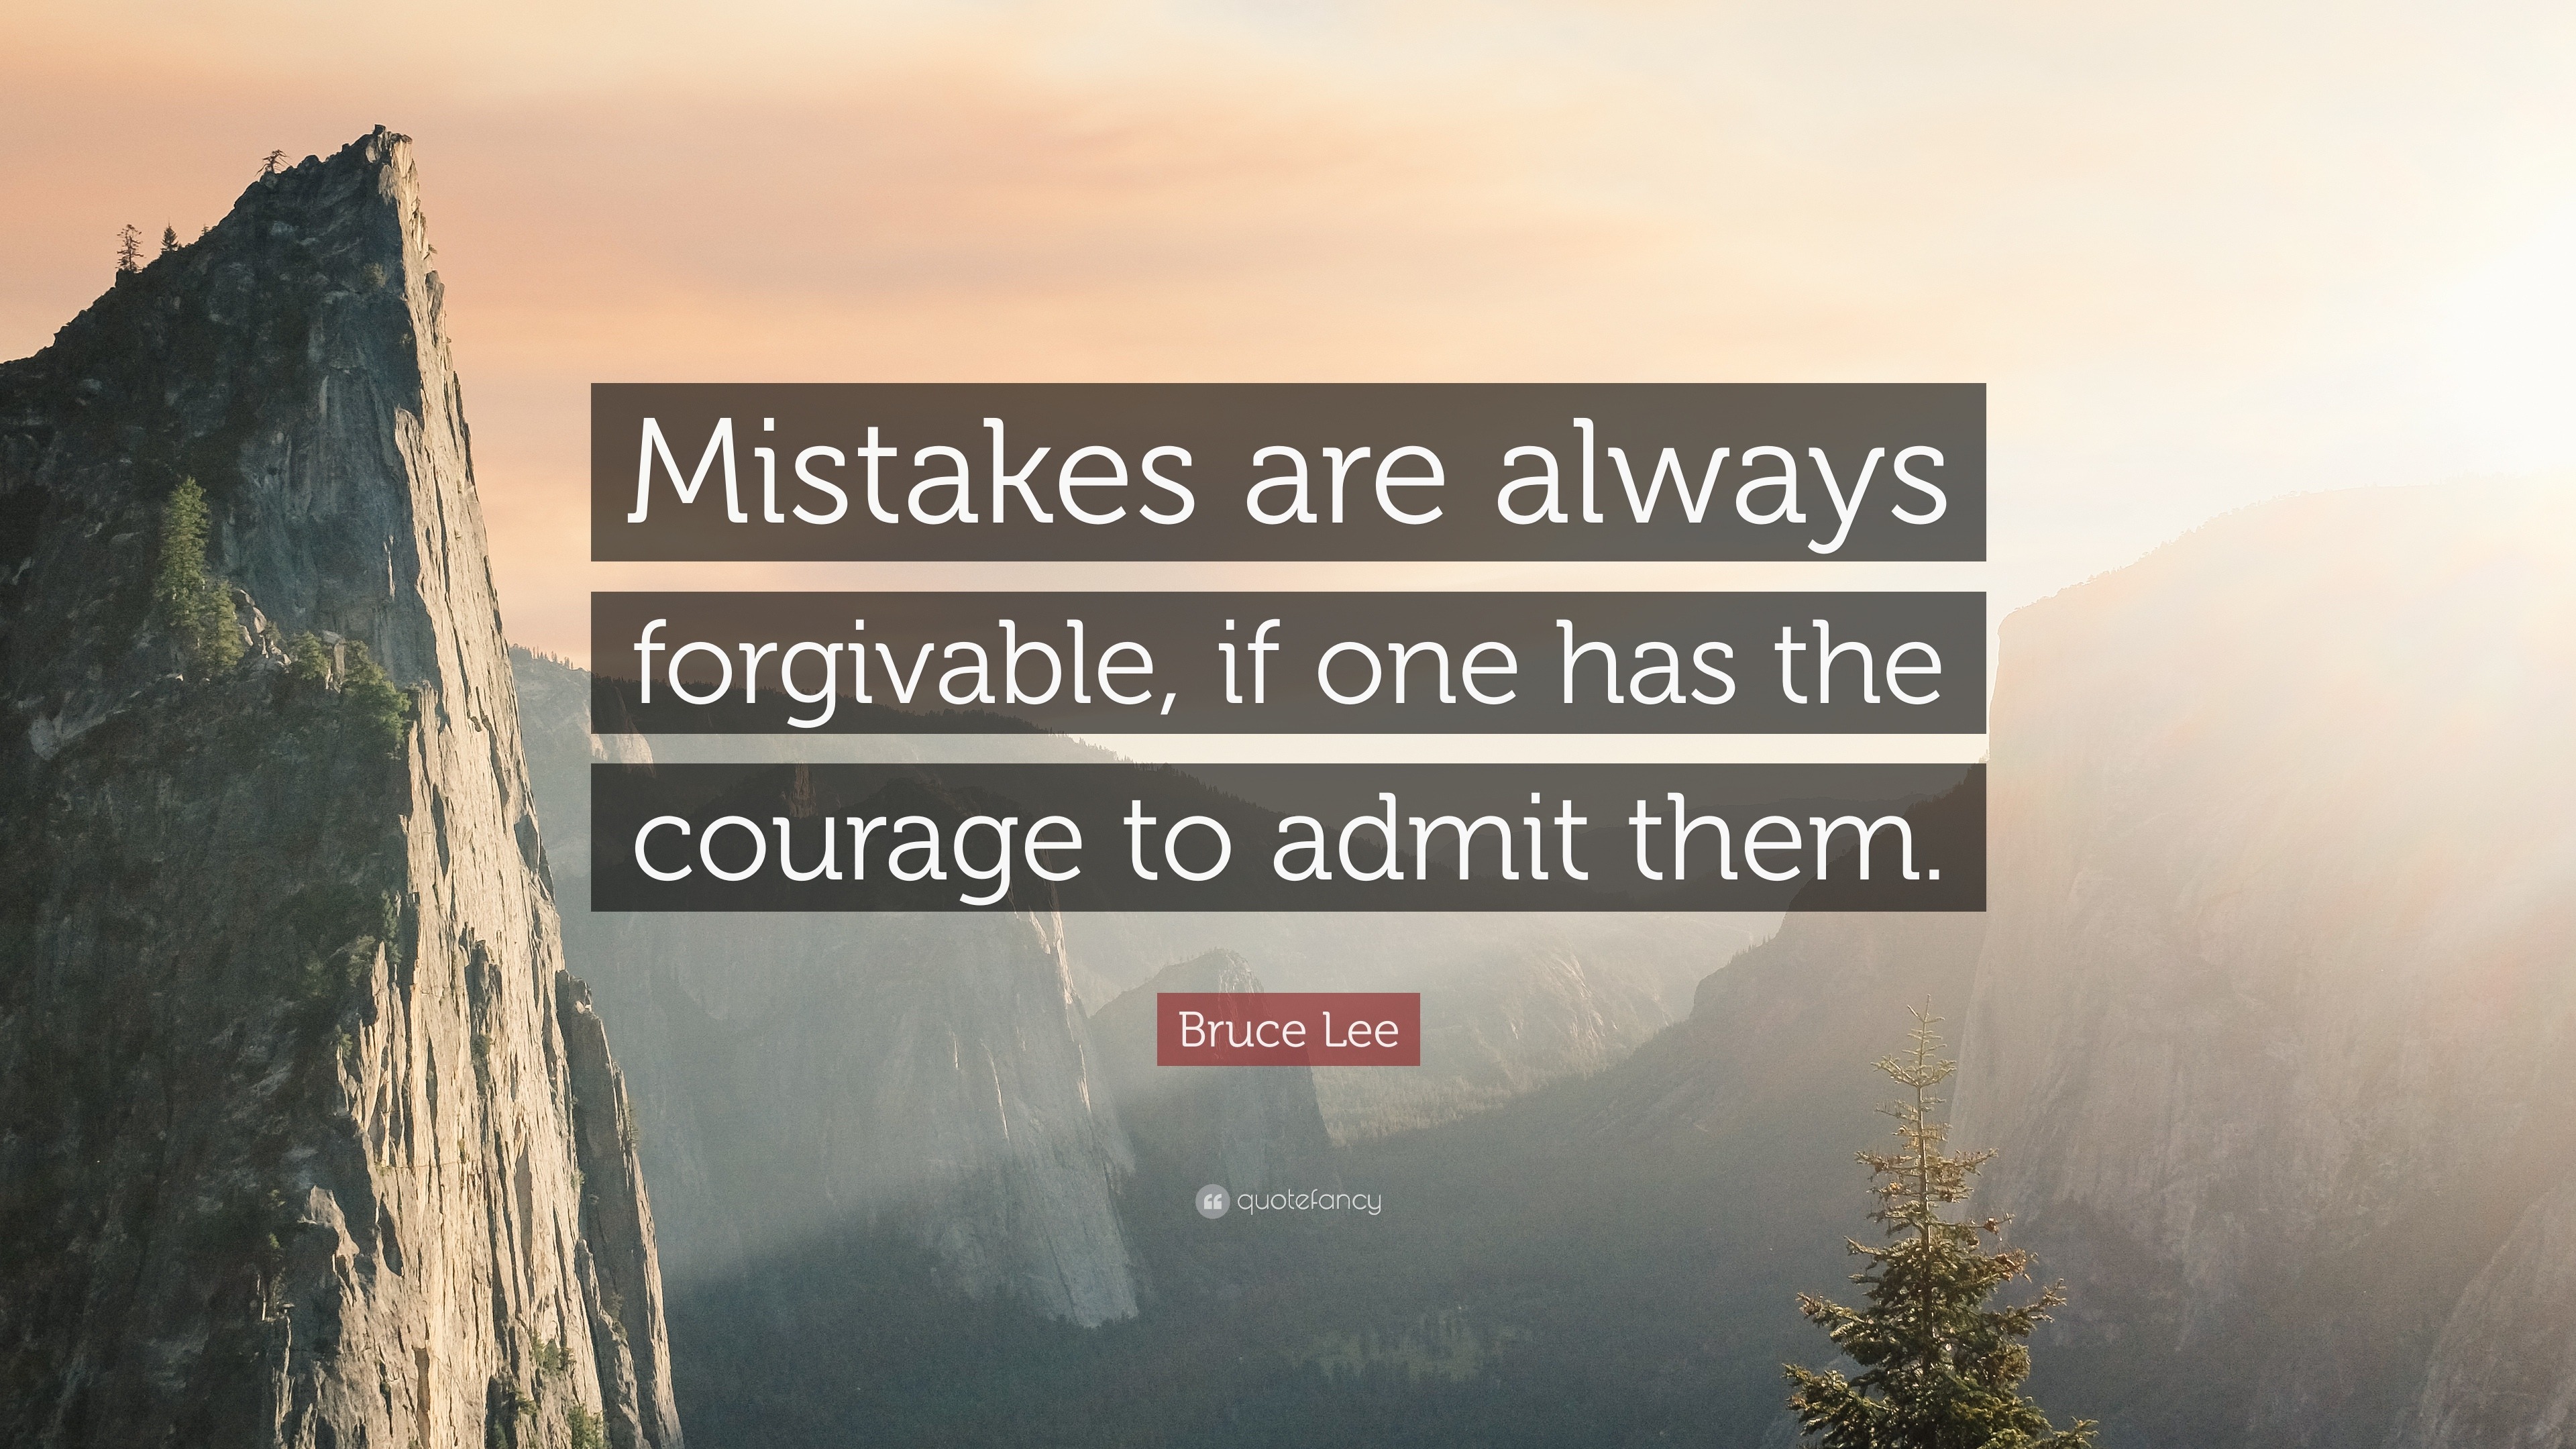 Bruce Lee Quote Mistakes Are Always Forgivable If One Has The Courage To Admit Them